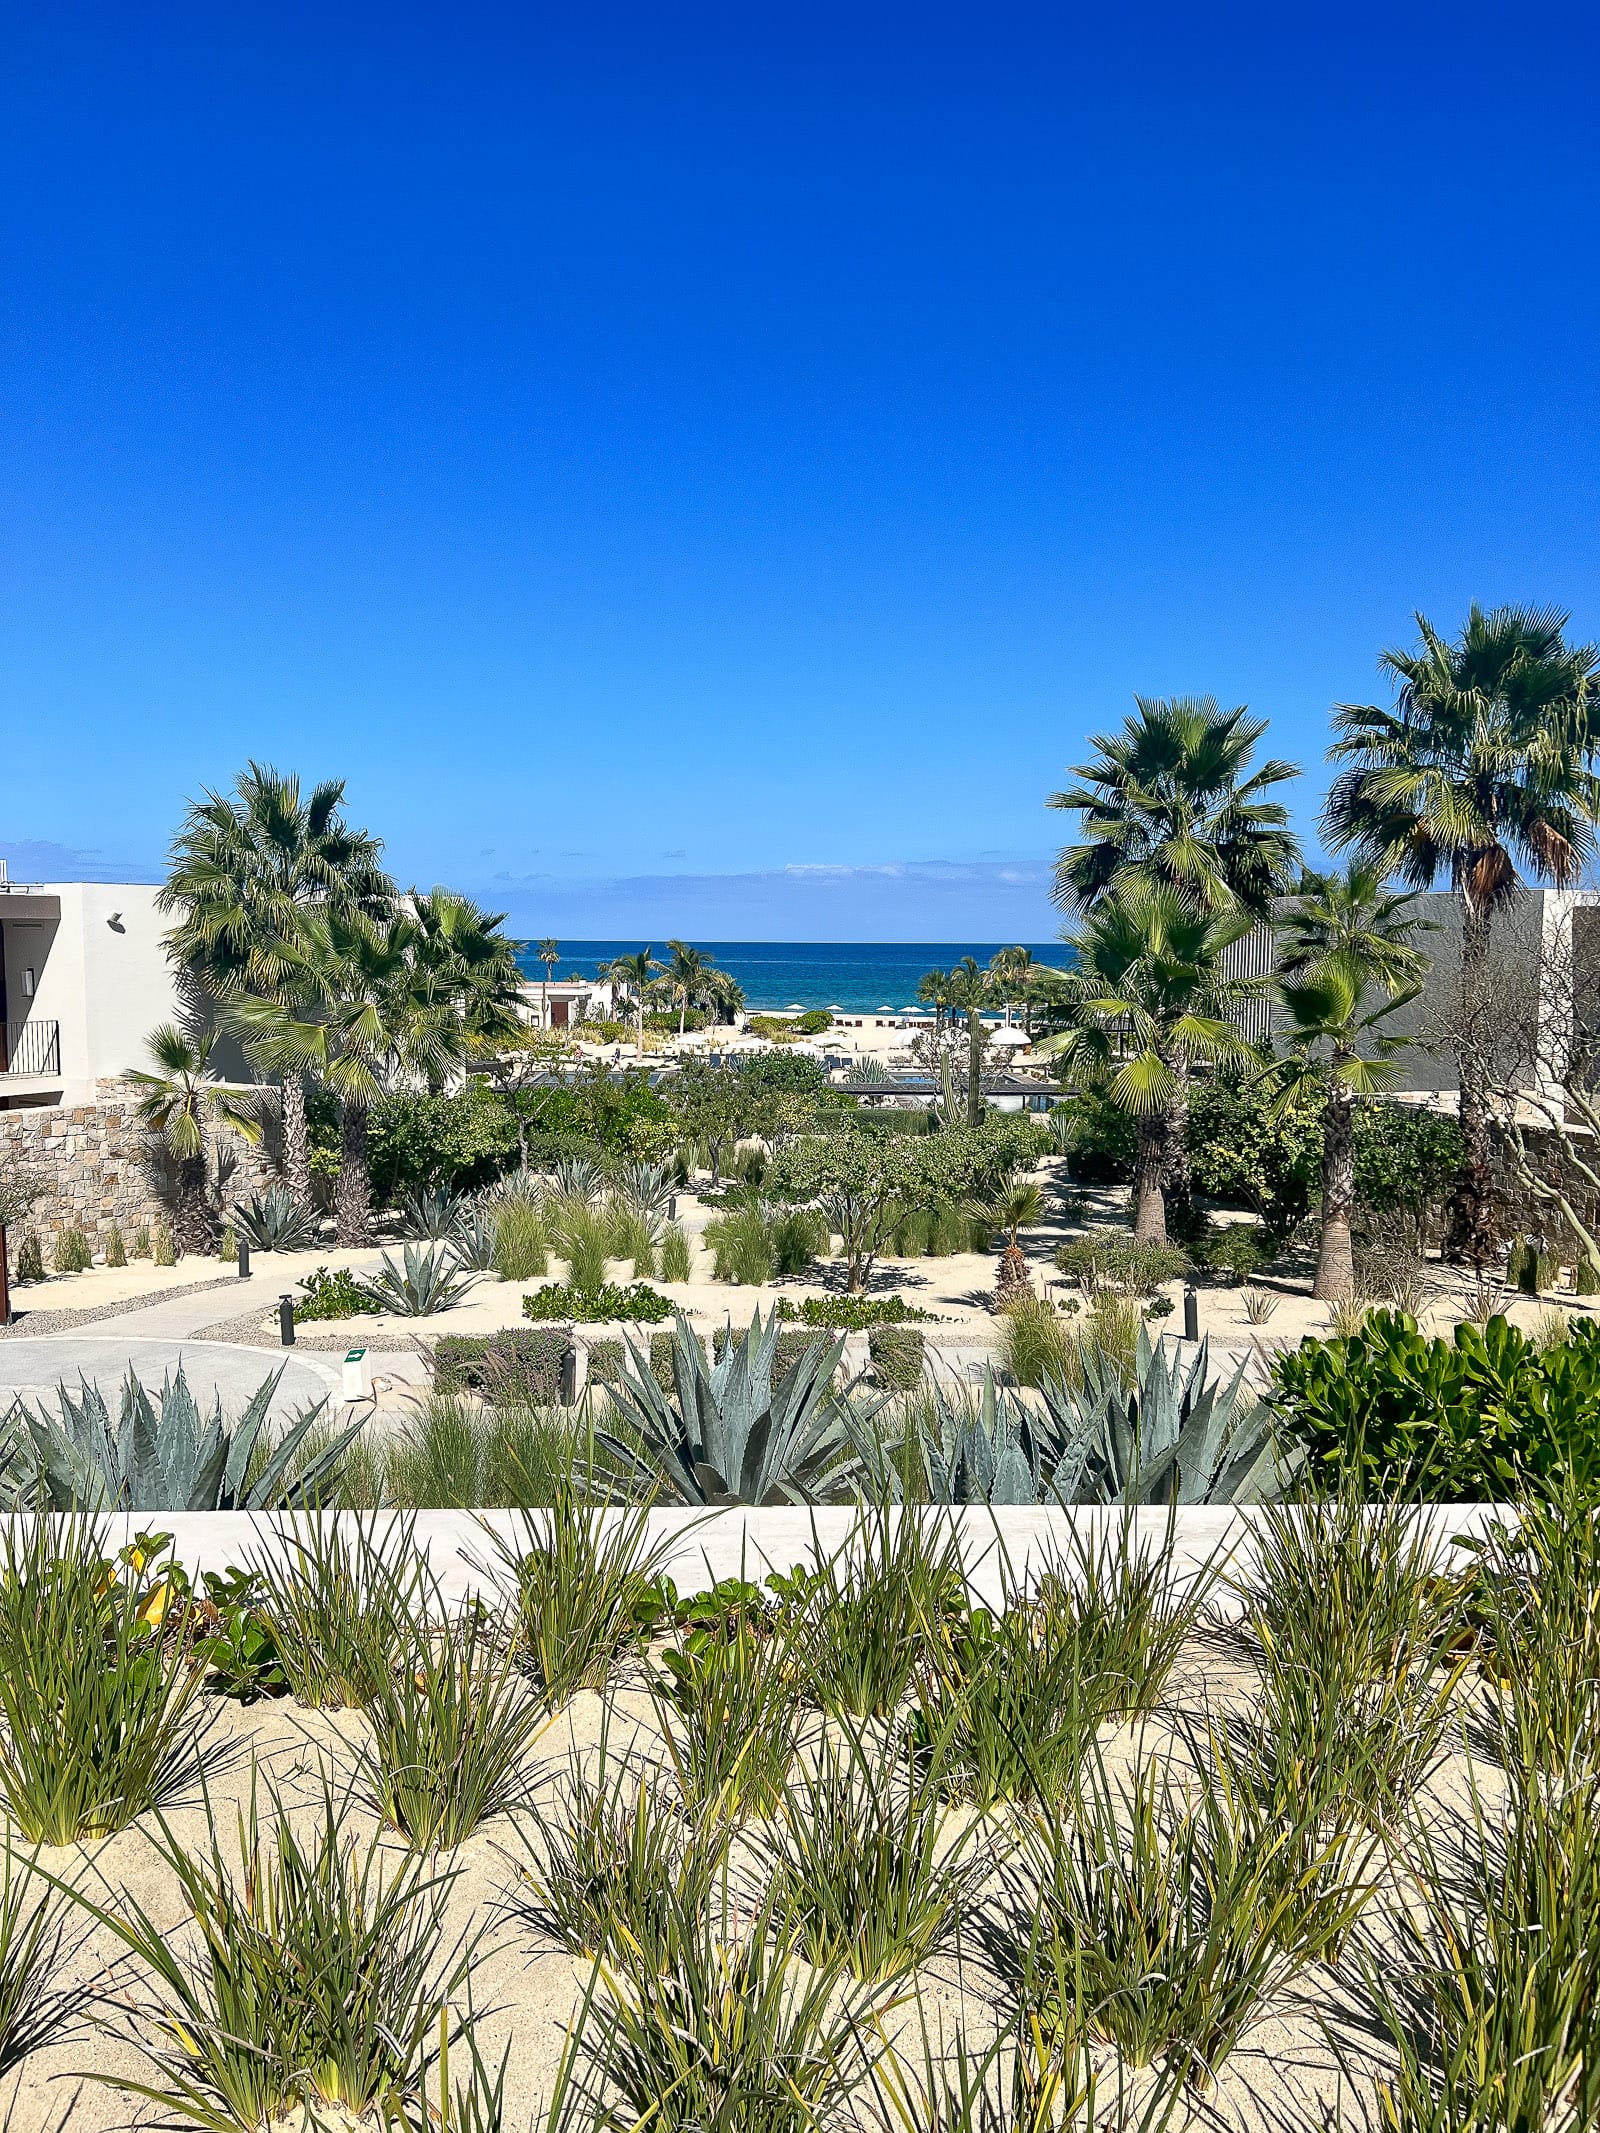 Staying at the Four Seasons in Cabo